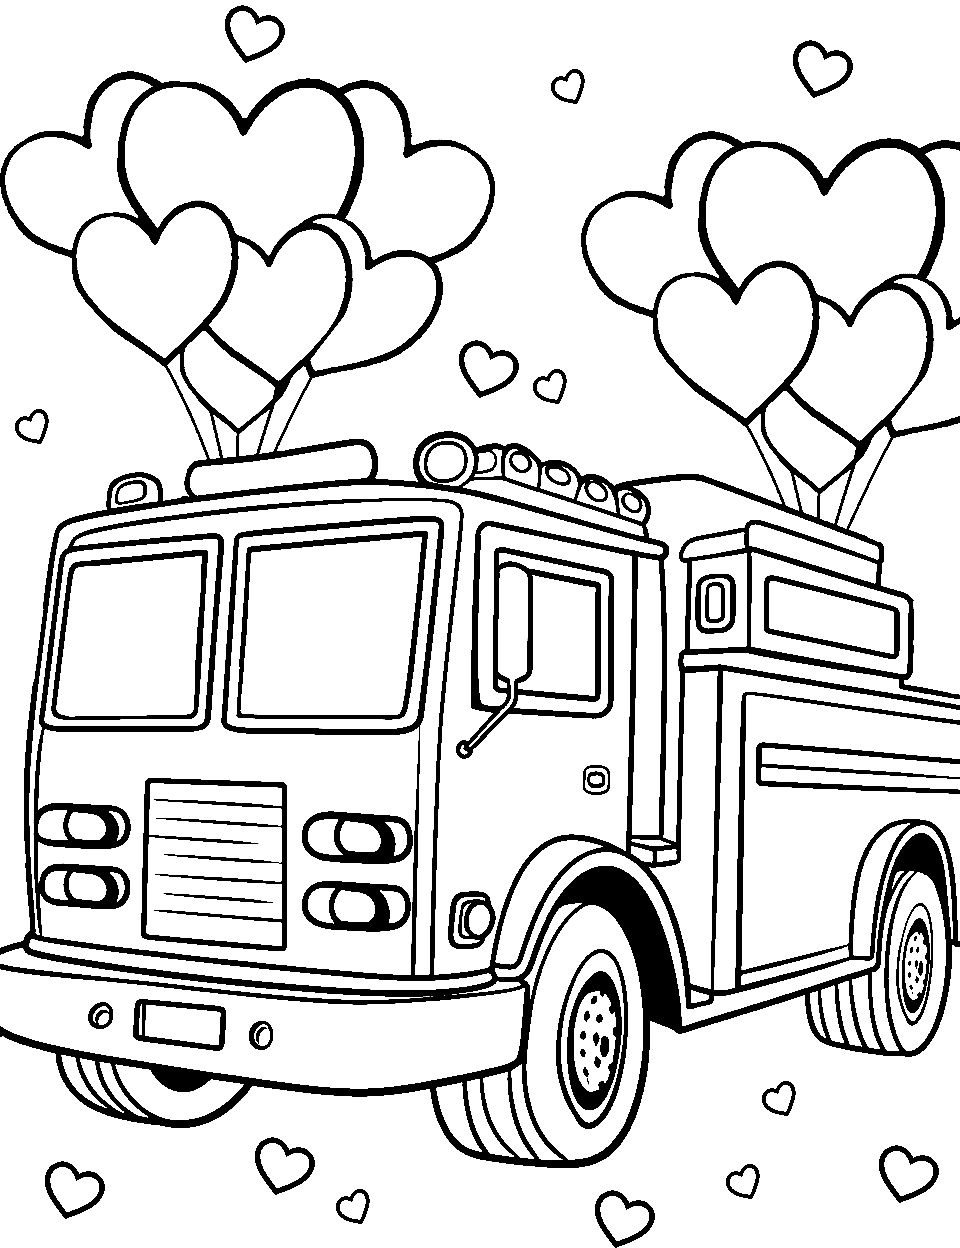 Valentine's Day Fire Truck Coloring Page - A fire truck with Valentine’s Day decorations.